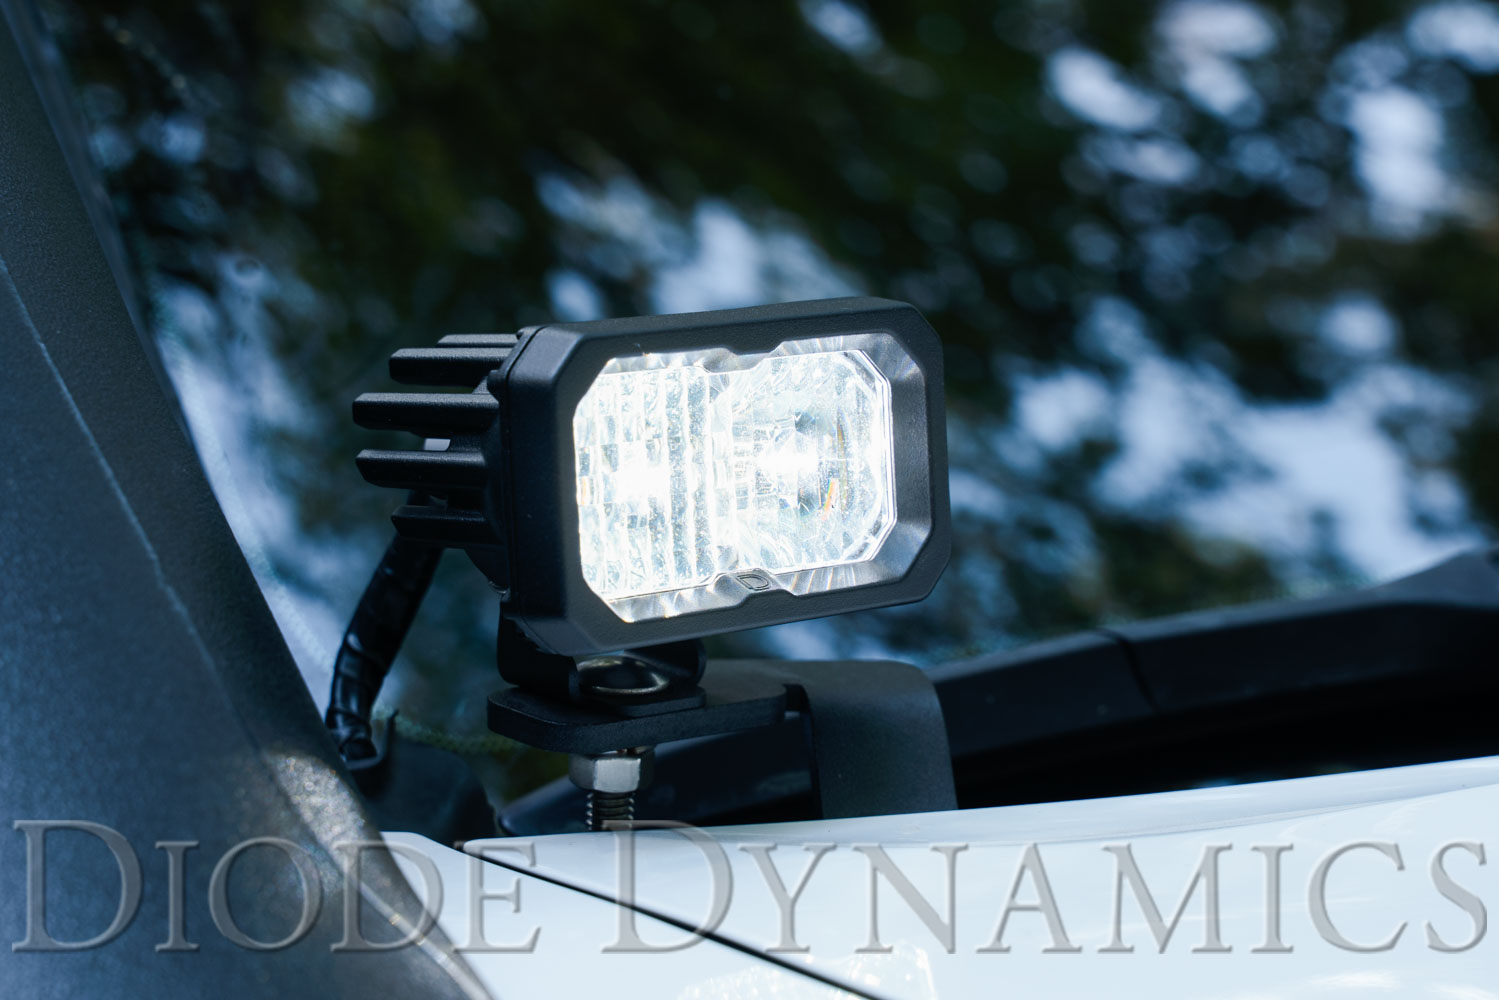 Diode Dynamics Stage Series 2 Inch LED Pod, Sport White Driving Standard ABL Pair